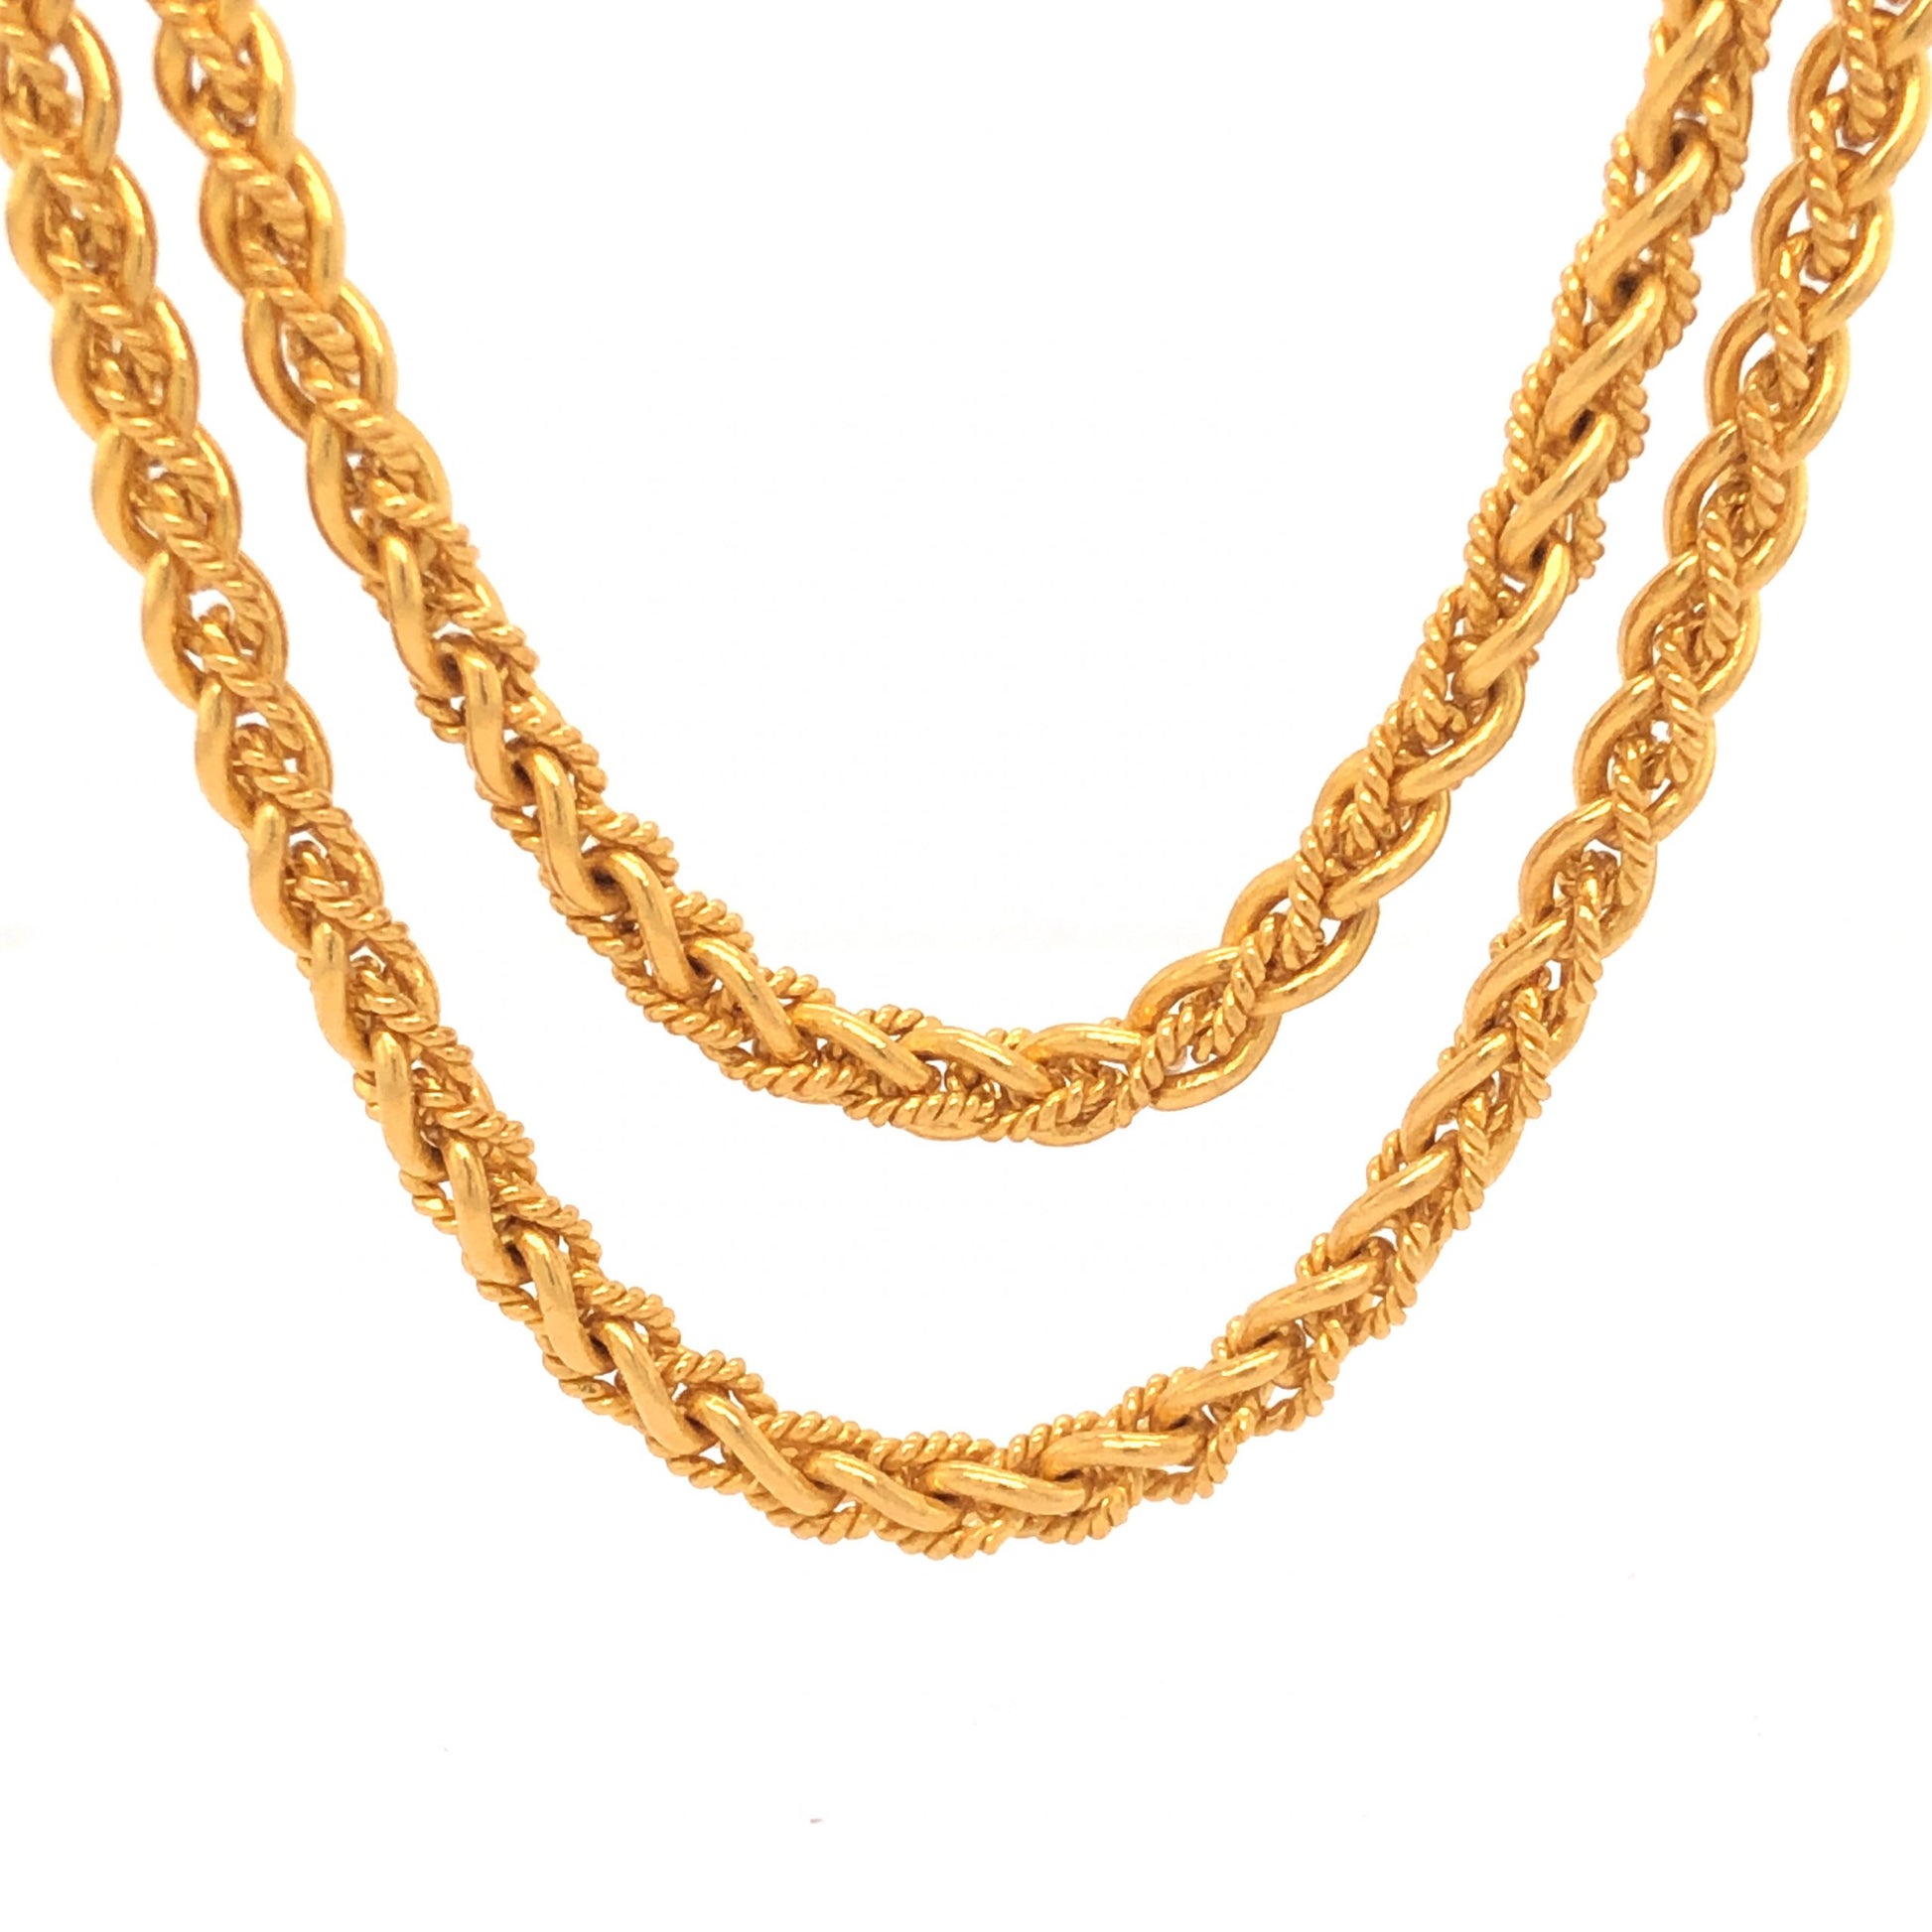 25 Inch Chain Necklace in 24k Yellow GoldComposition: 24 Karat Yellow Gold Total Gram Weight: 70.0 g Inscription: 24k
      